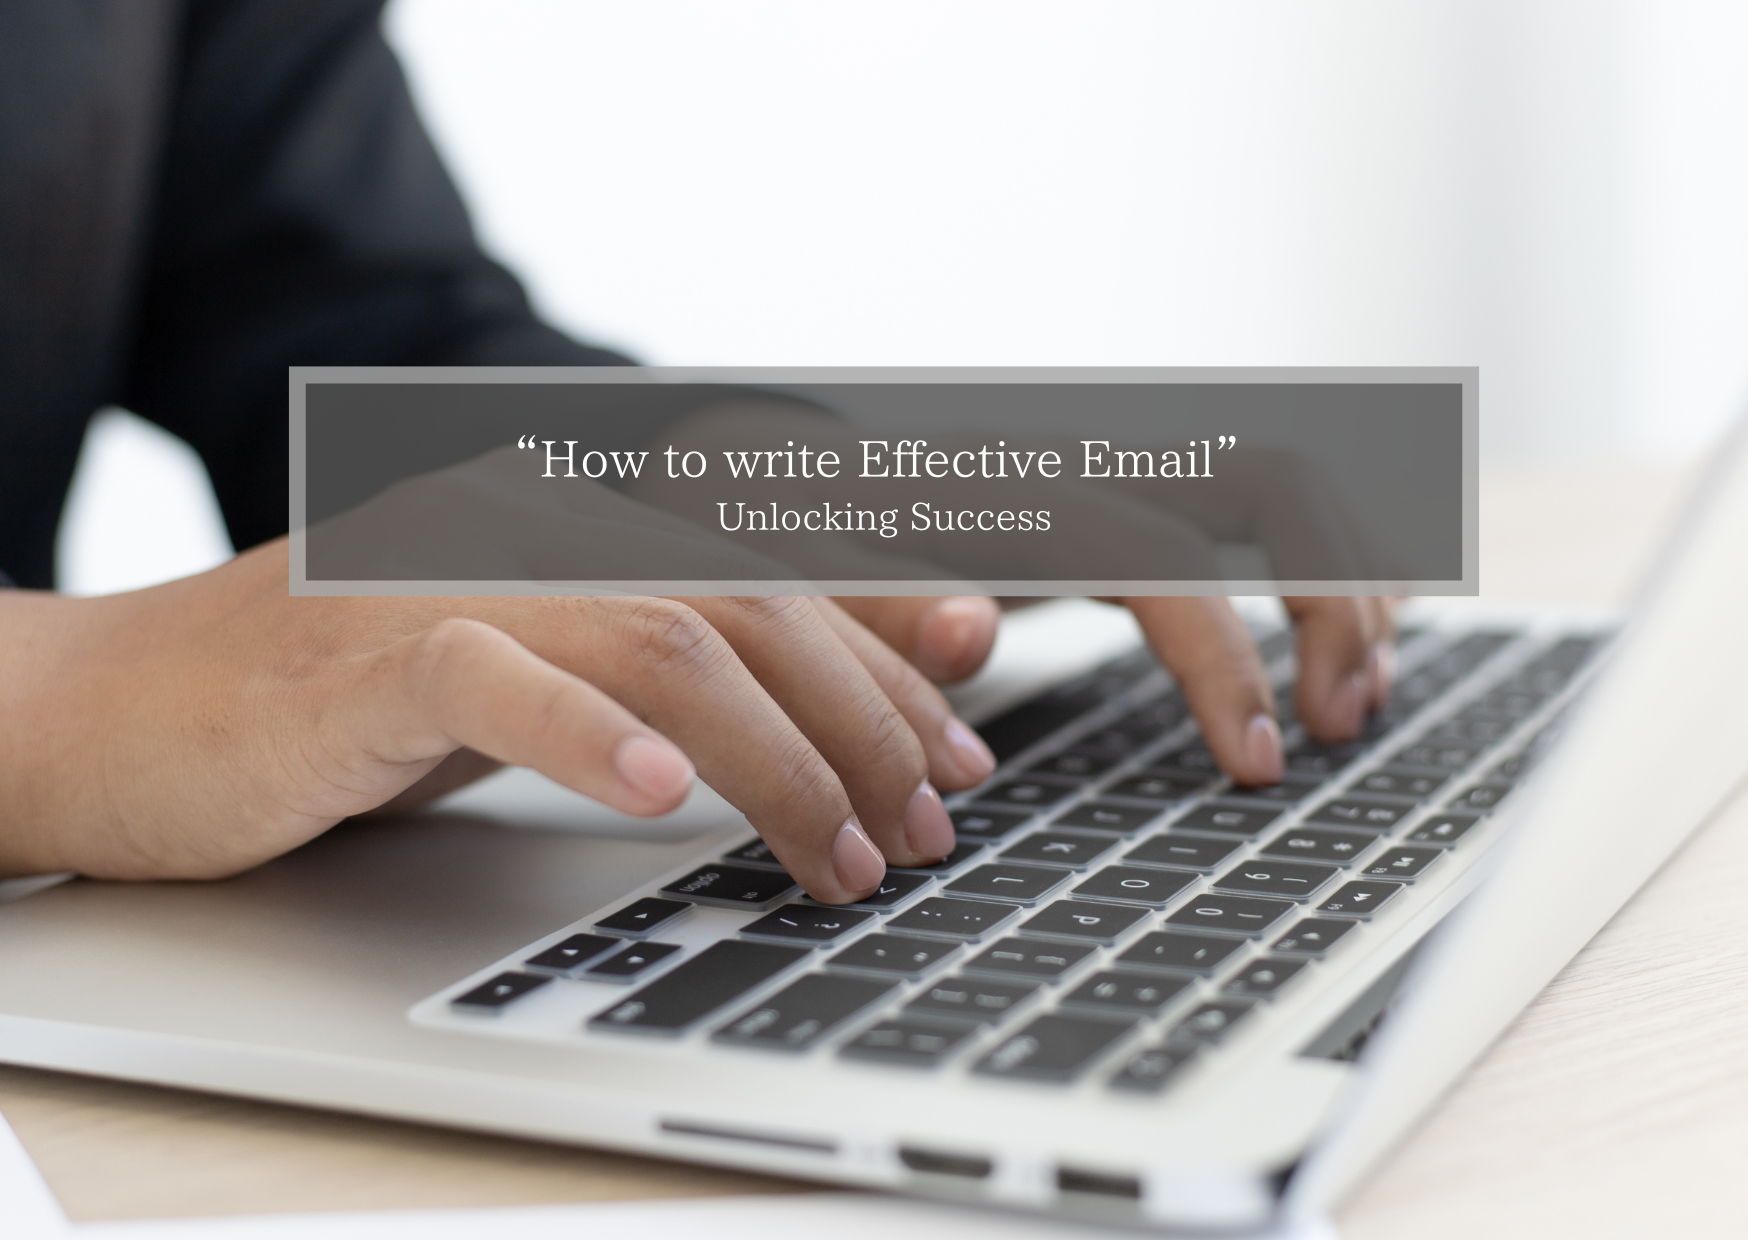 How to write effective email